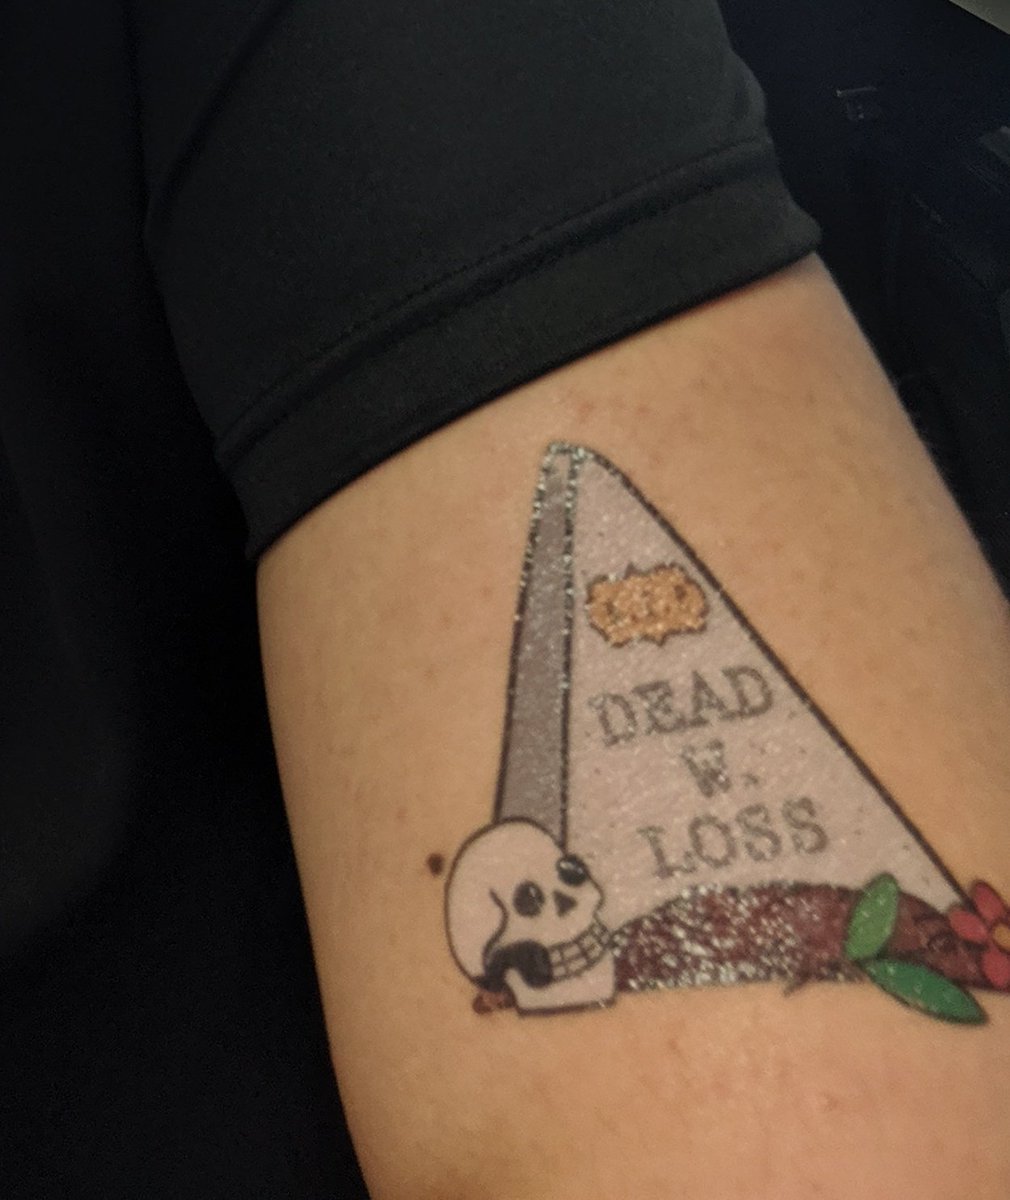 Happy Halloween! I came to environmental econ class with this temporary DWL tattoo. Thank u to my colleague, Natalia Boliari, for the tattoo.  #EconTwitter #marketfaikure #deadweightloss #teachecon #halloween2019